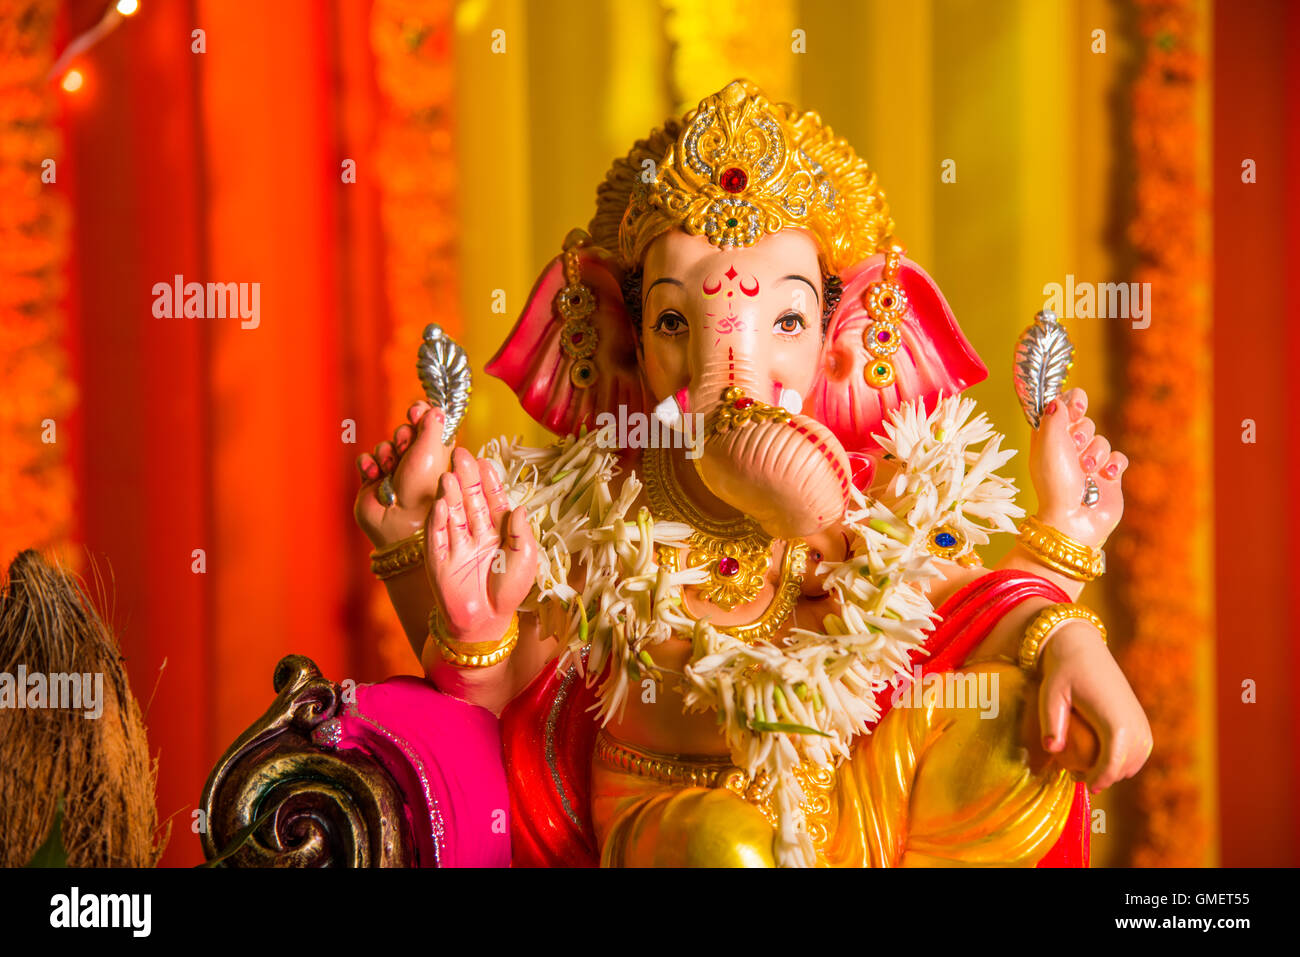 A clay statue of an Indian god Lord Ganesha Stock Photo - Alamy